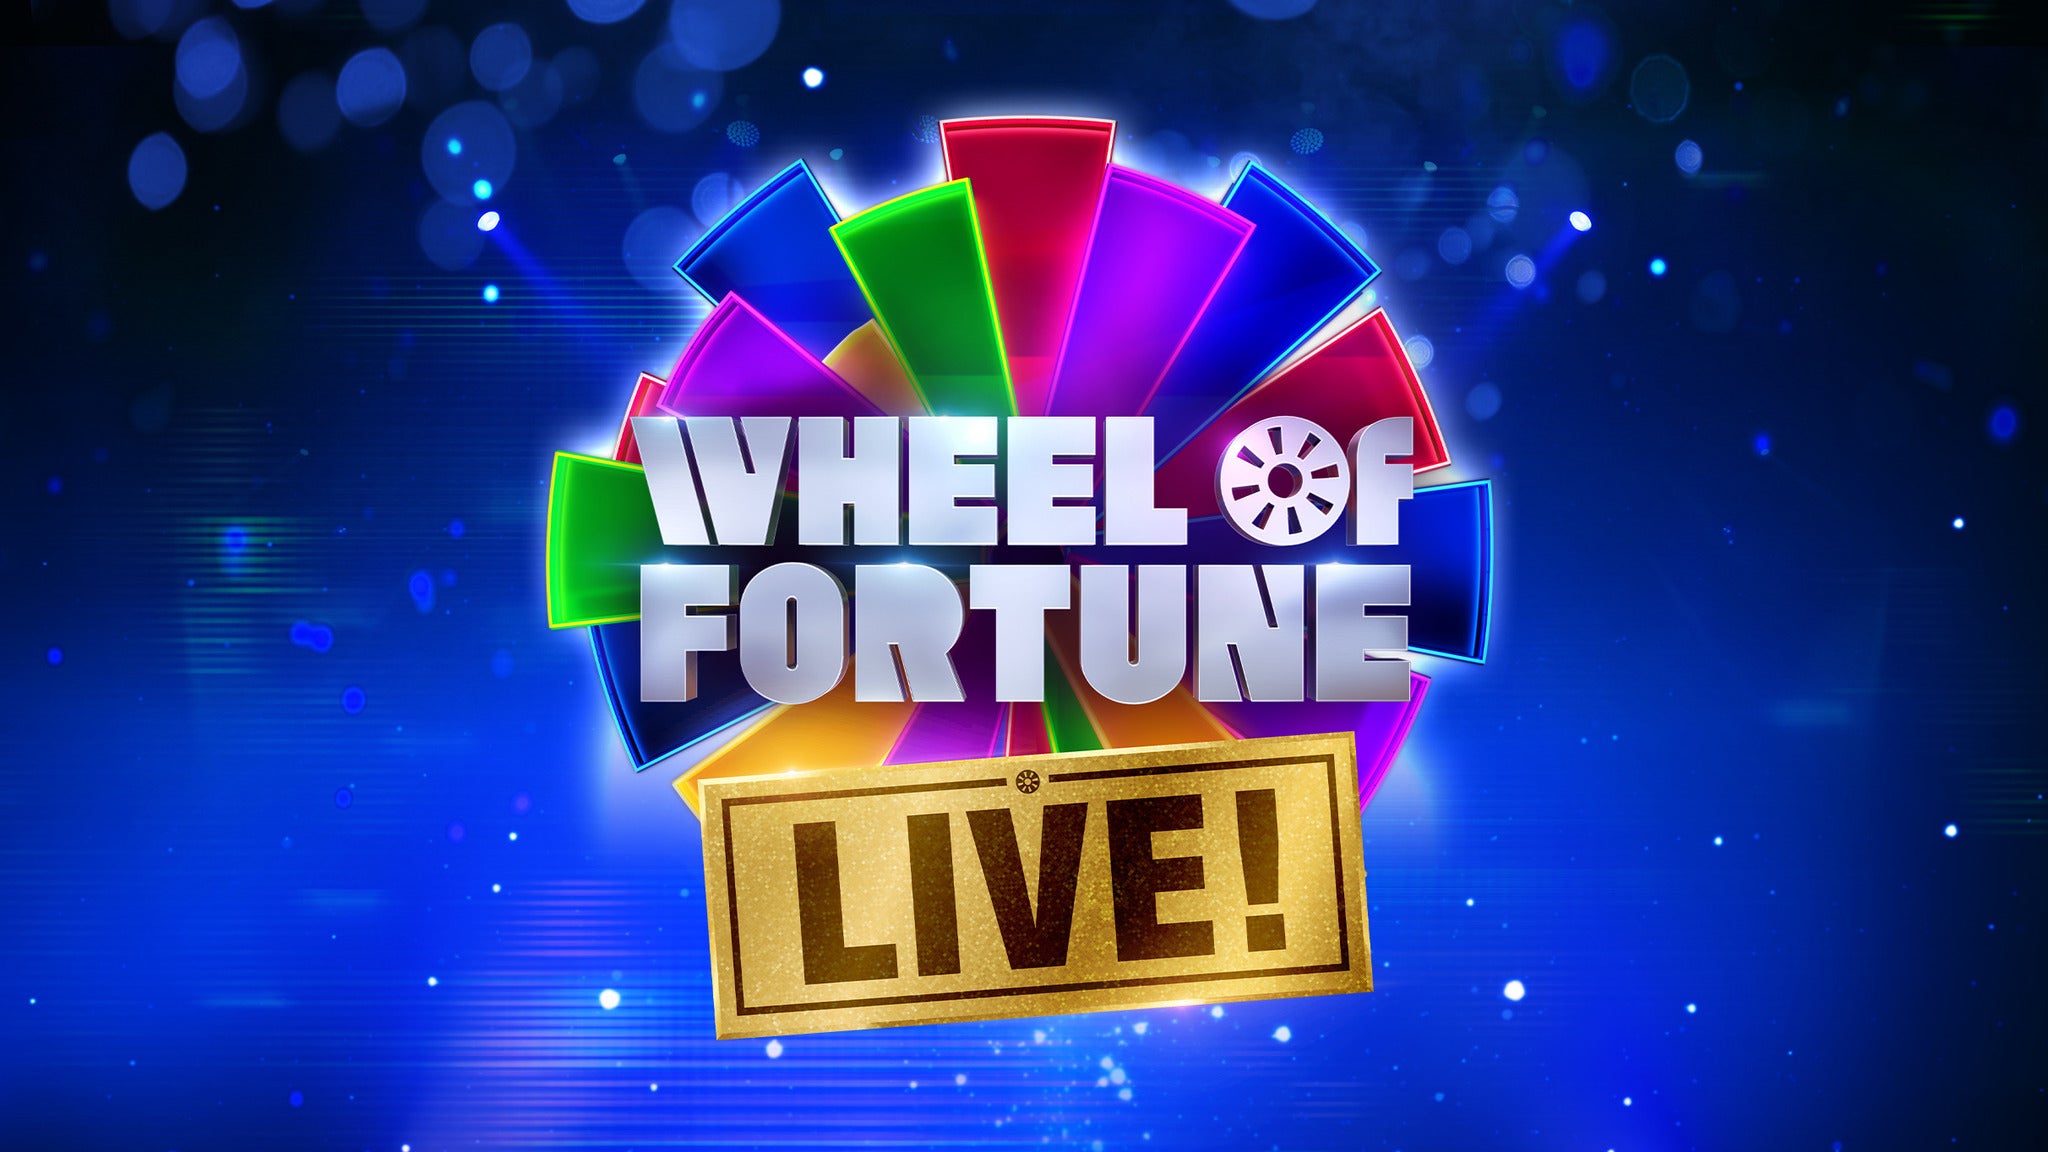 Wheel of Fortune Live! at Bellco Theatre